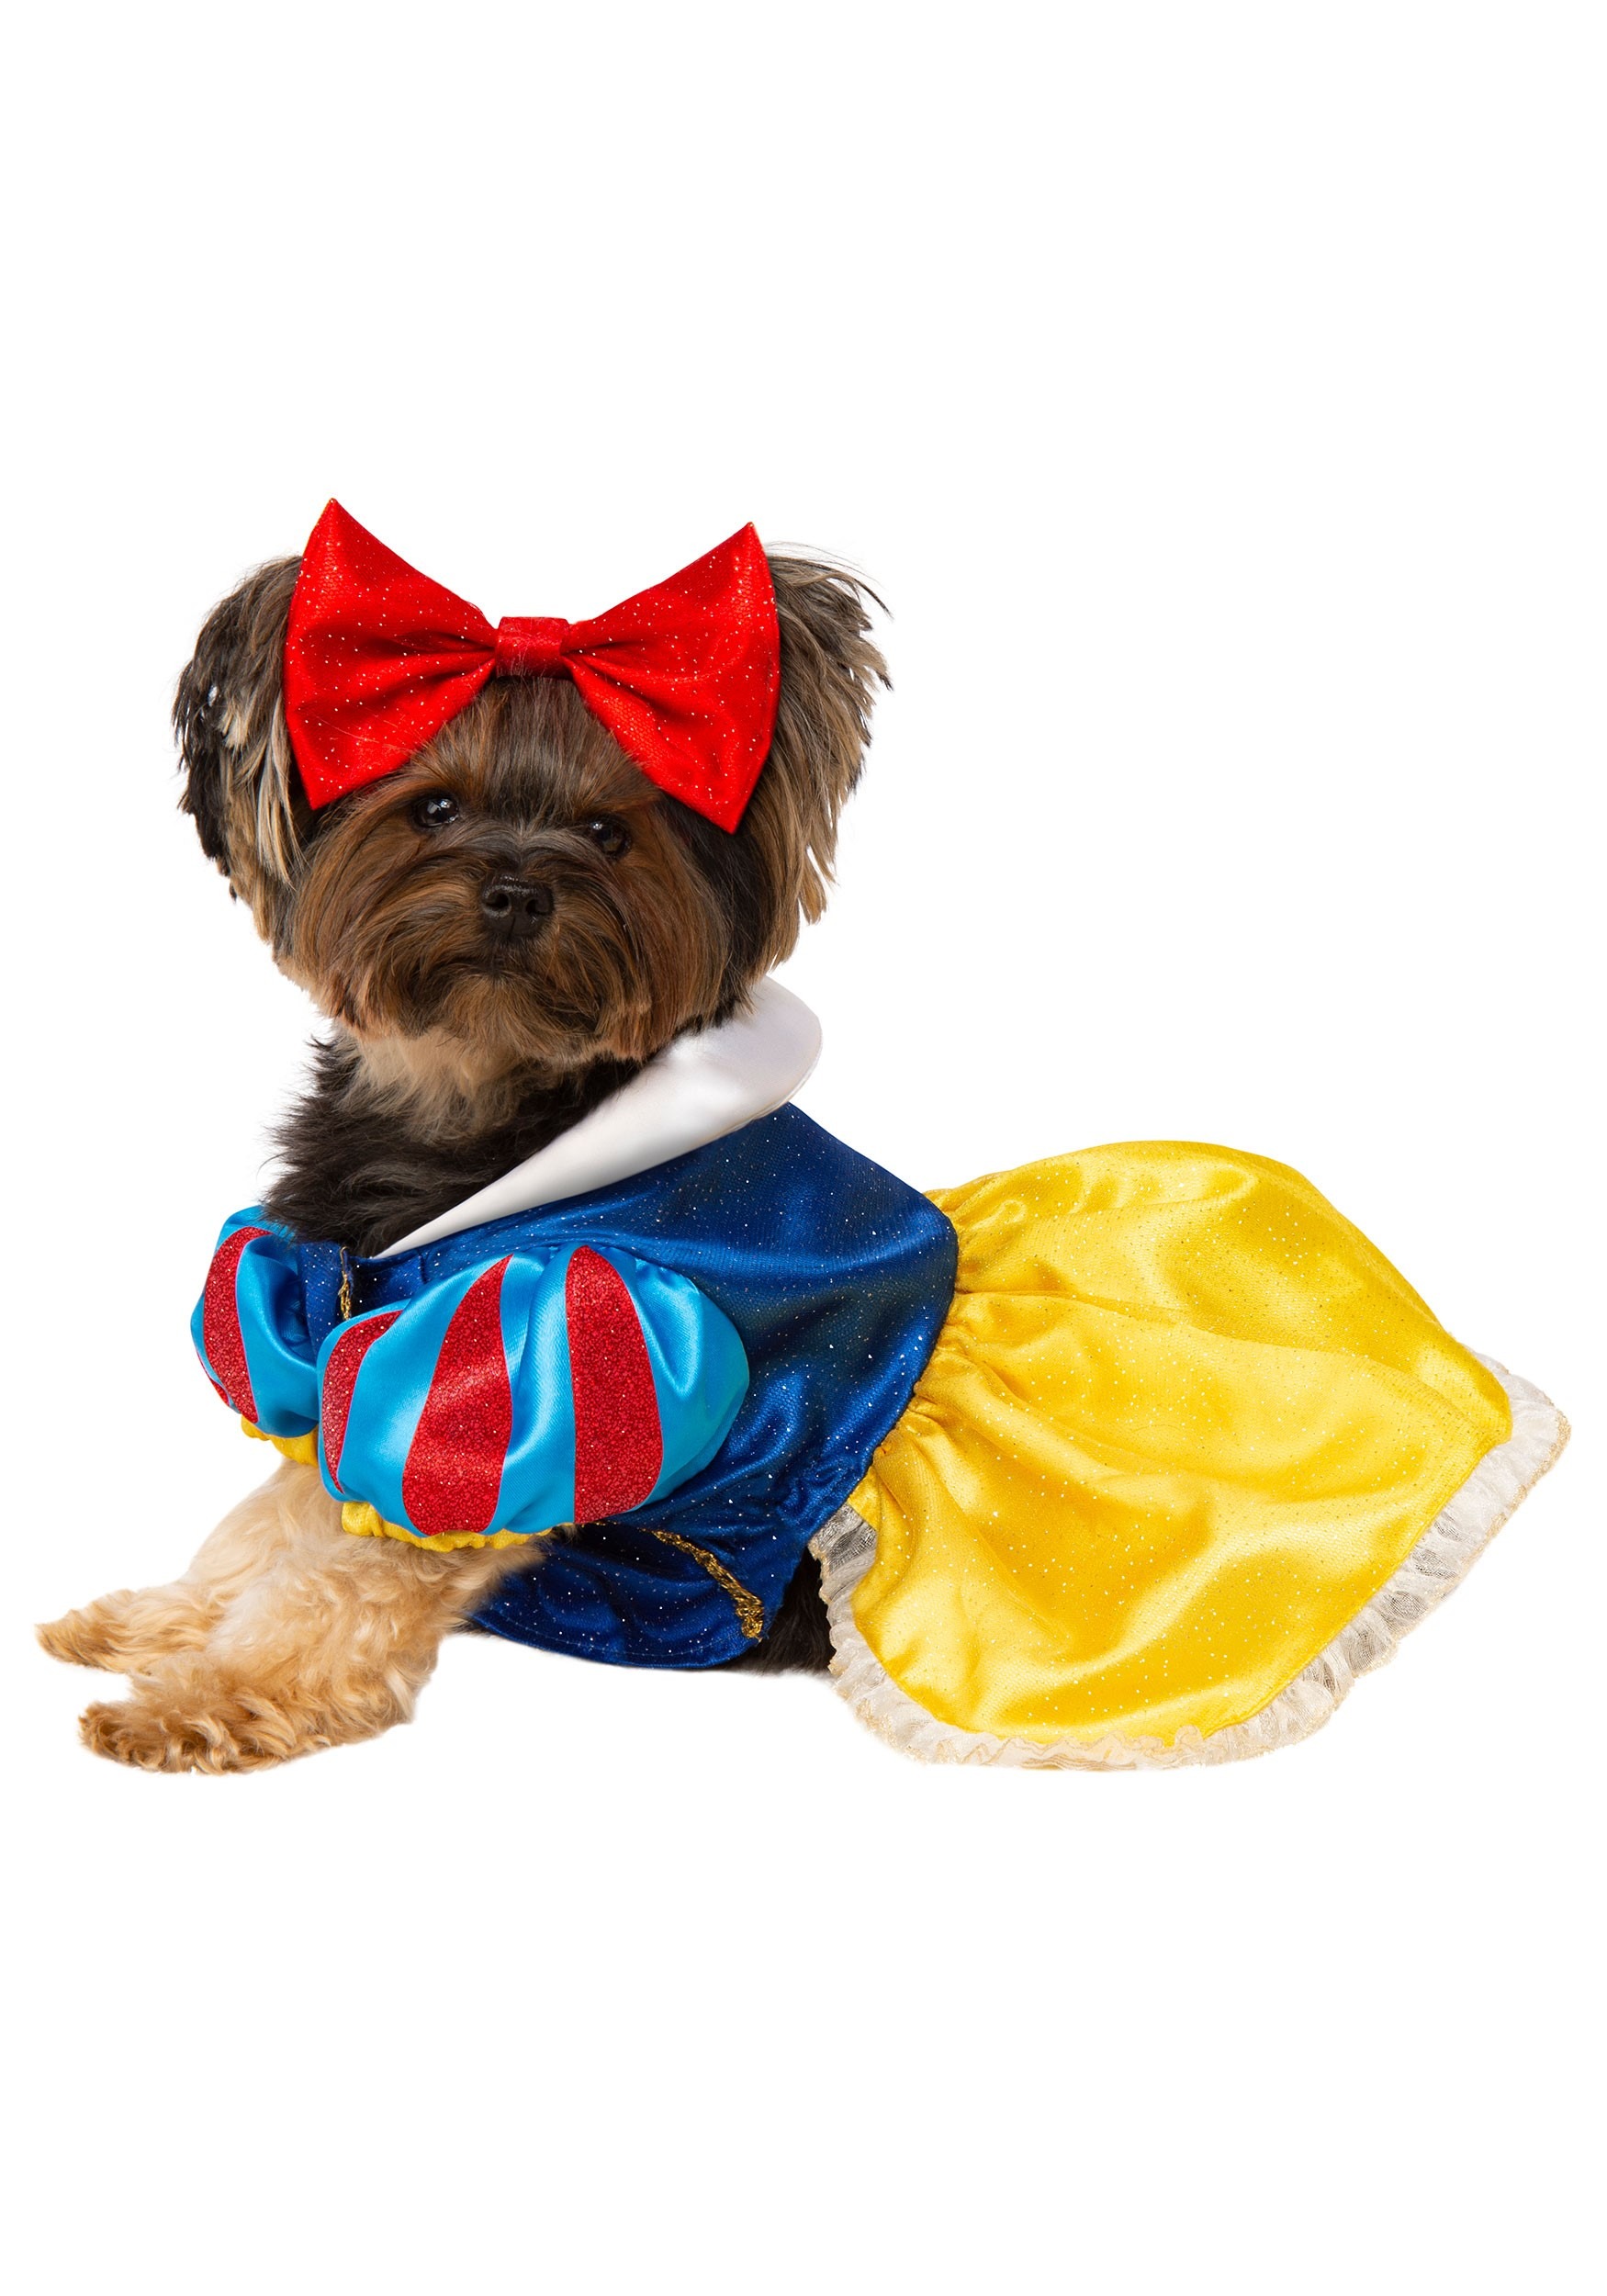 Snow White Costume for Pets